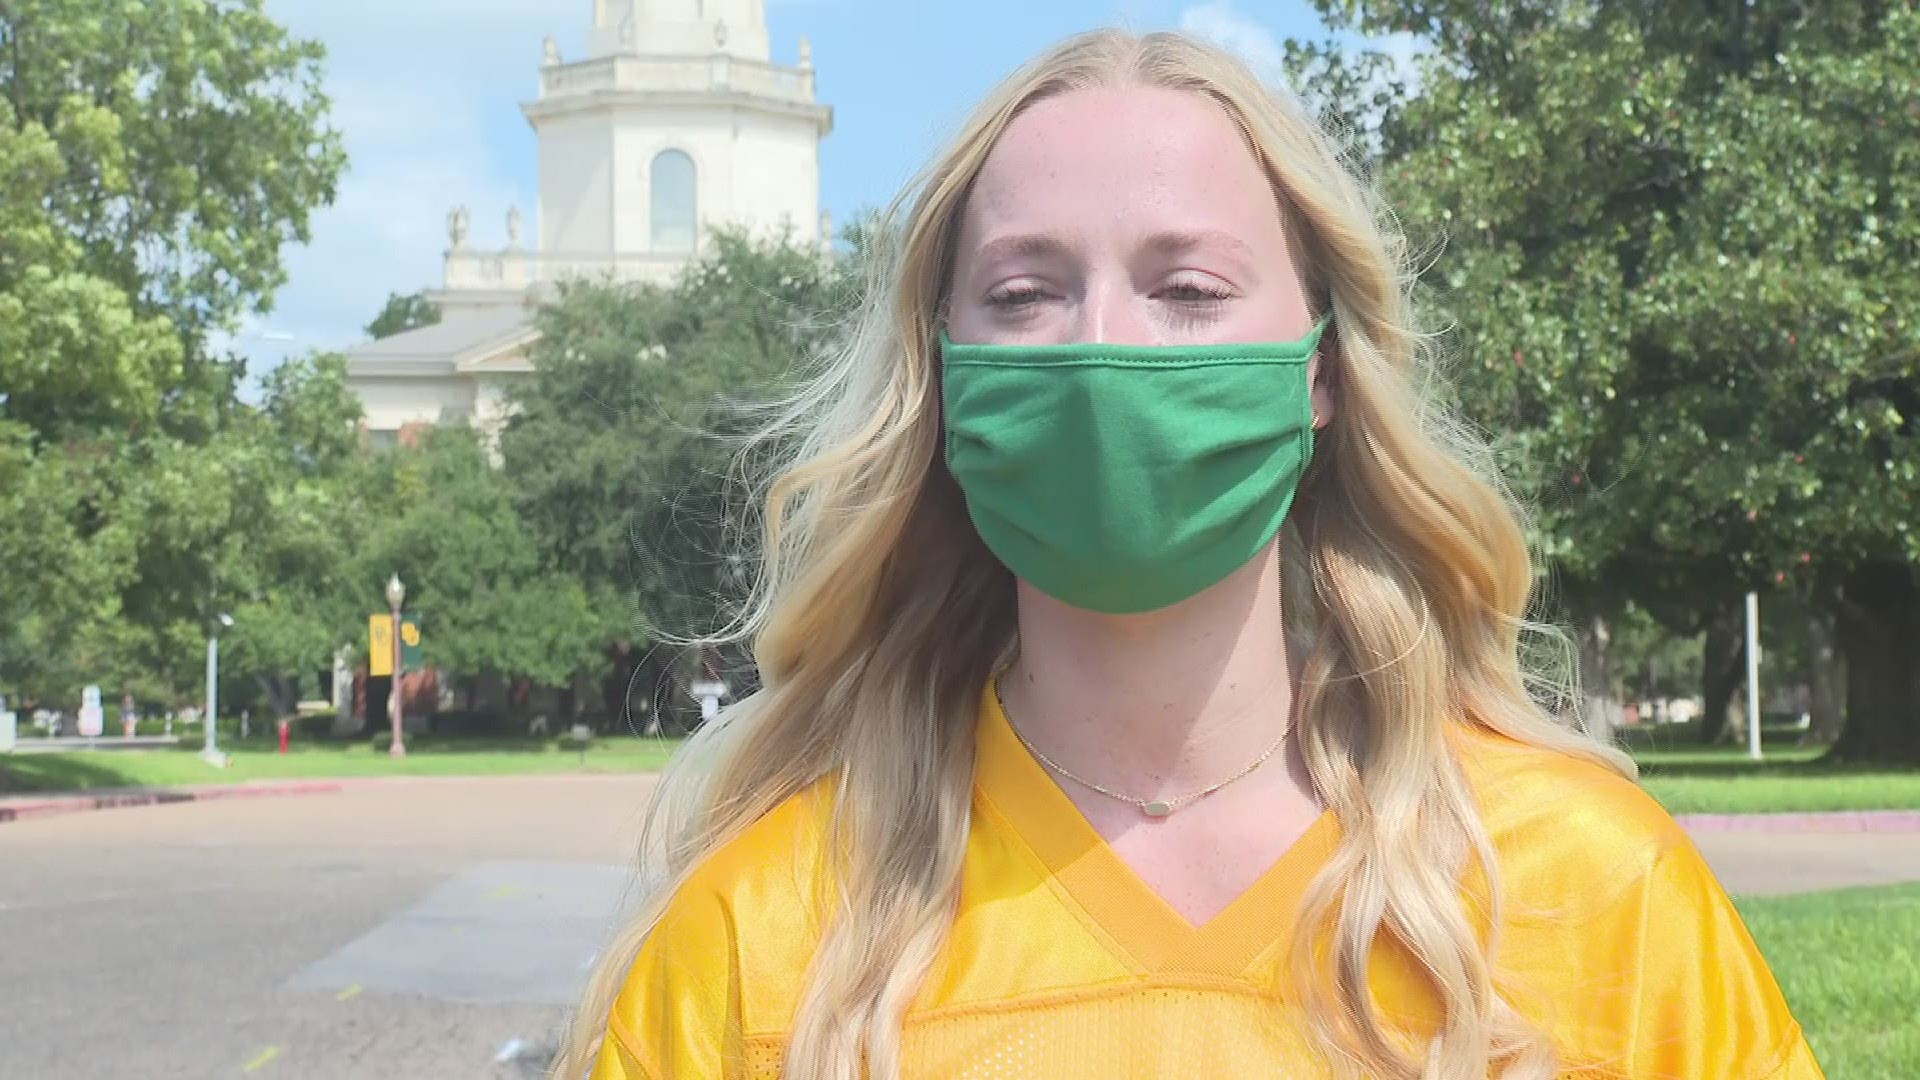 The scene at Baylor's season opener wasn't what it usually looks like due to the COVID-19 pandemic, but fans were still excited the football team finally got to